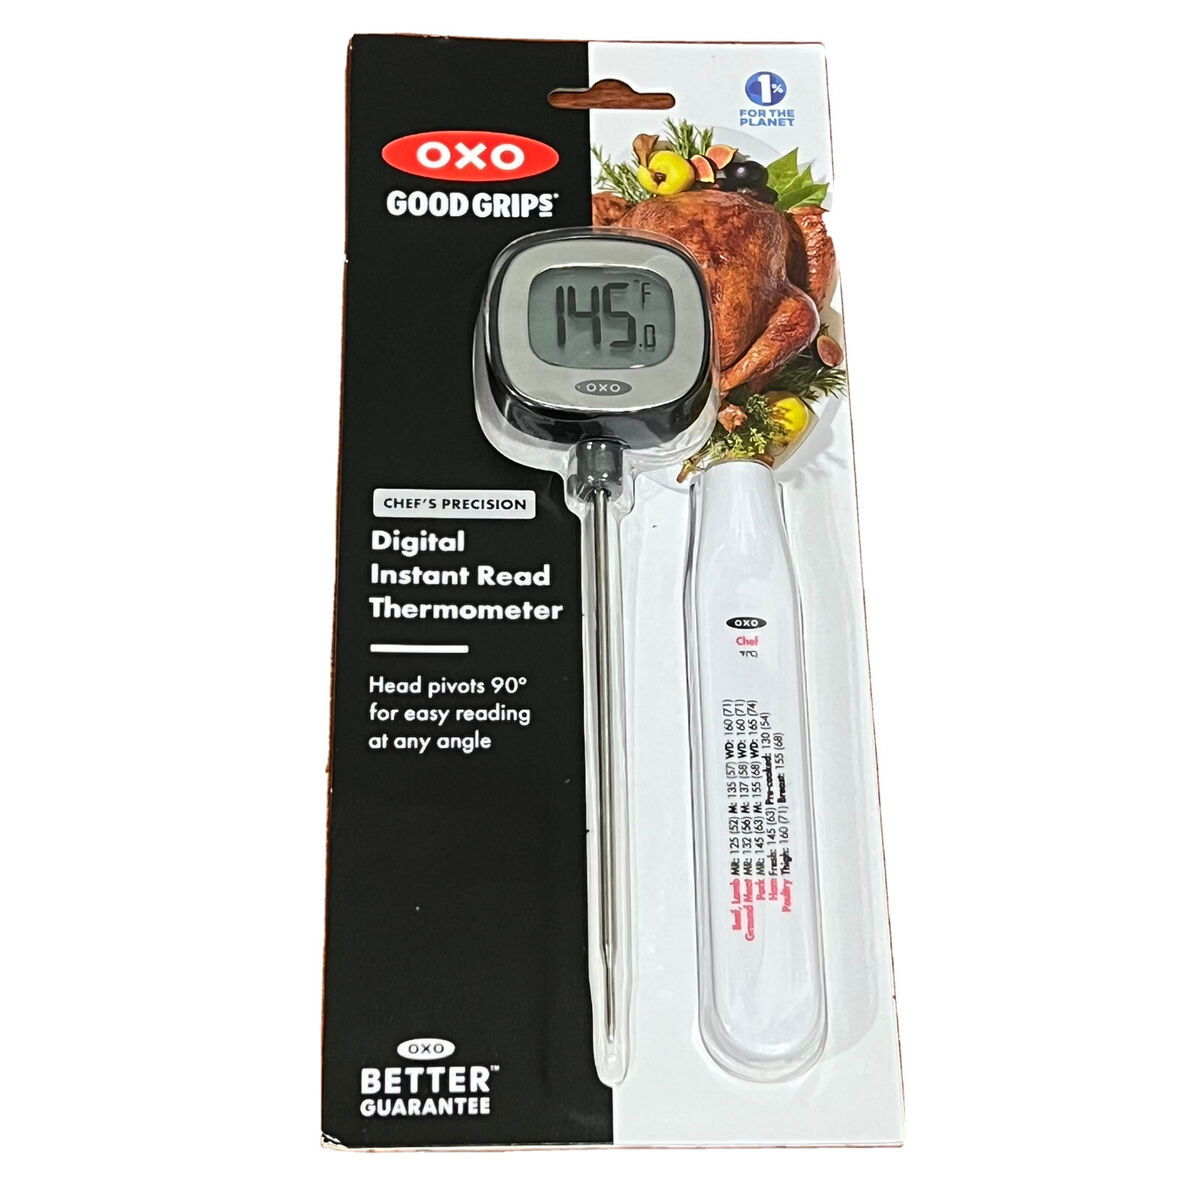 OXO Good Grips Precision Digital Instant Read Thermometer